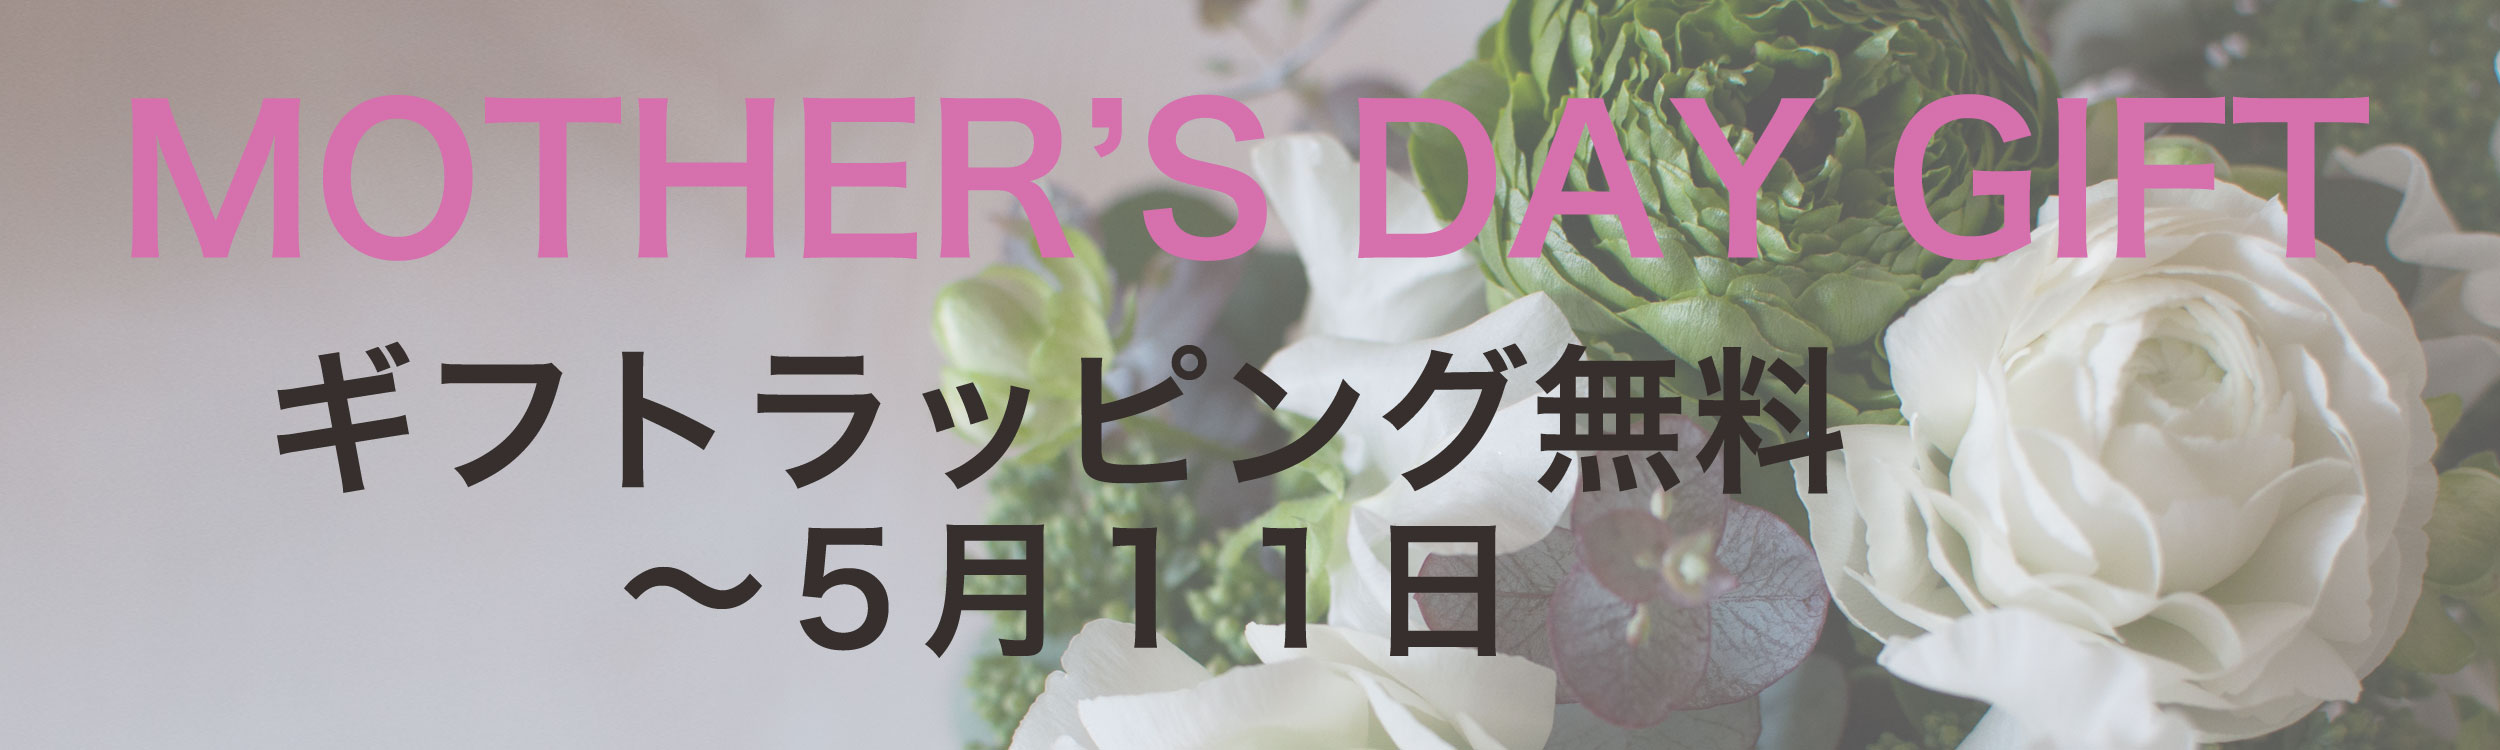 banner_mothersday2014